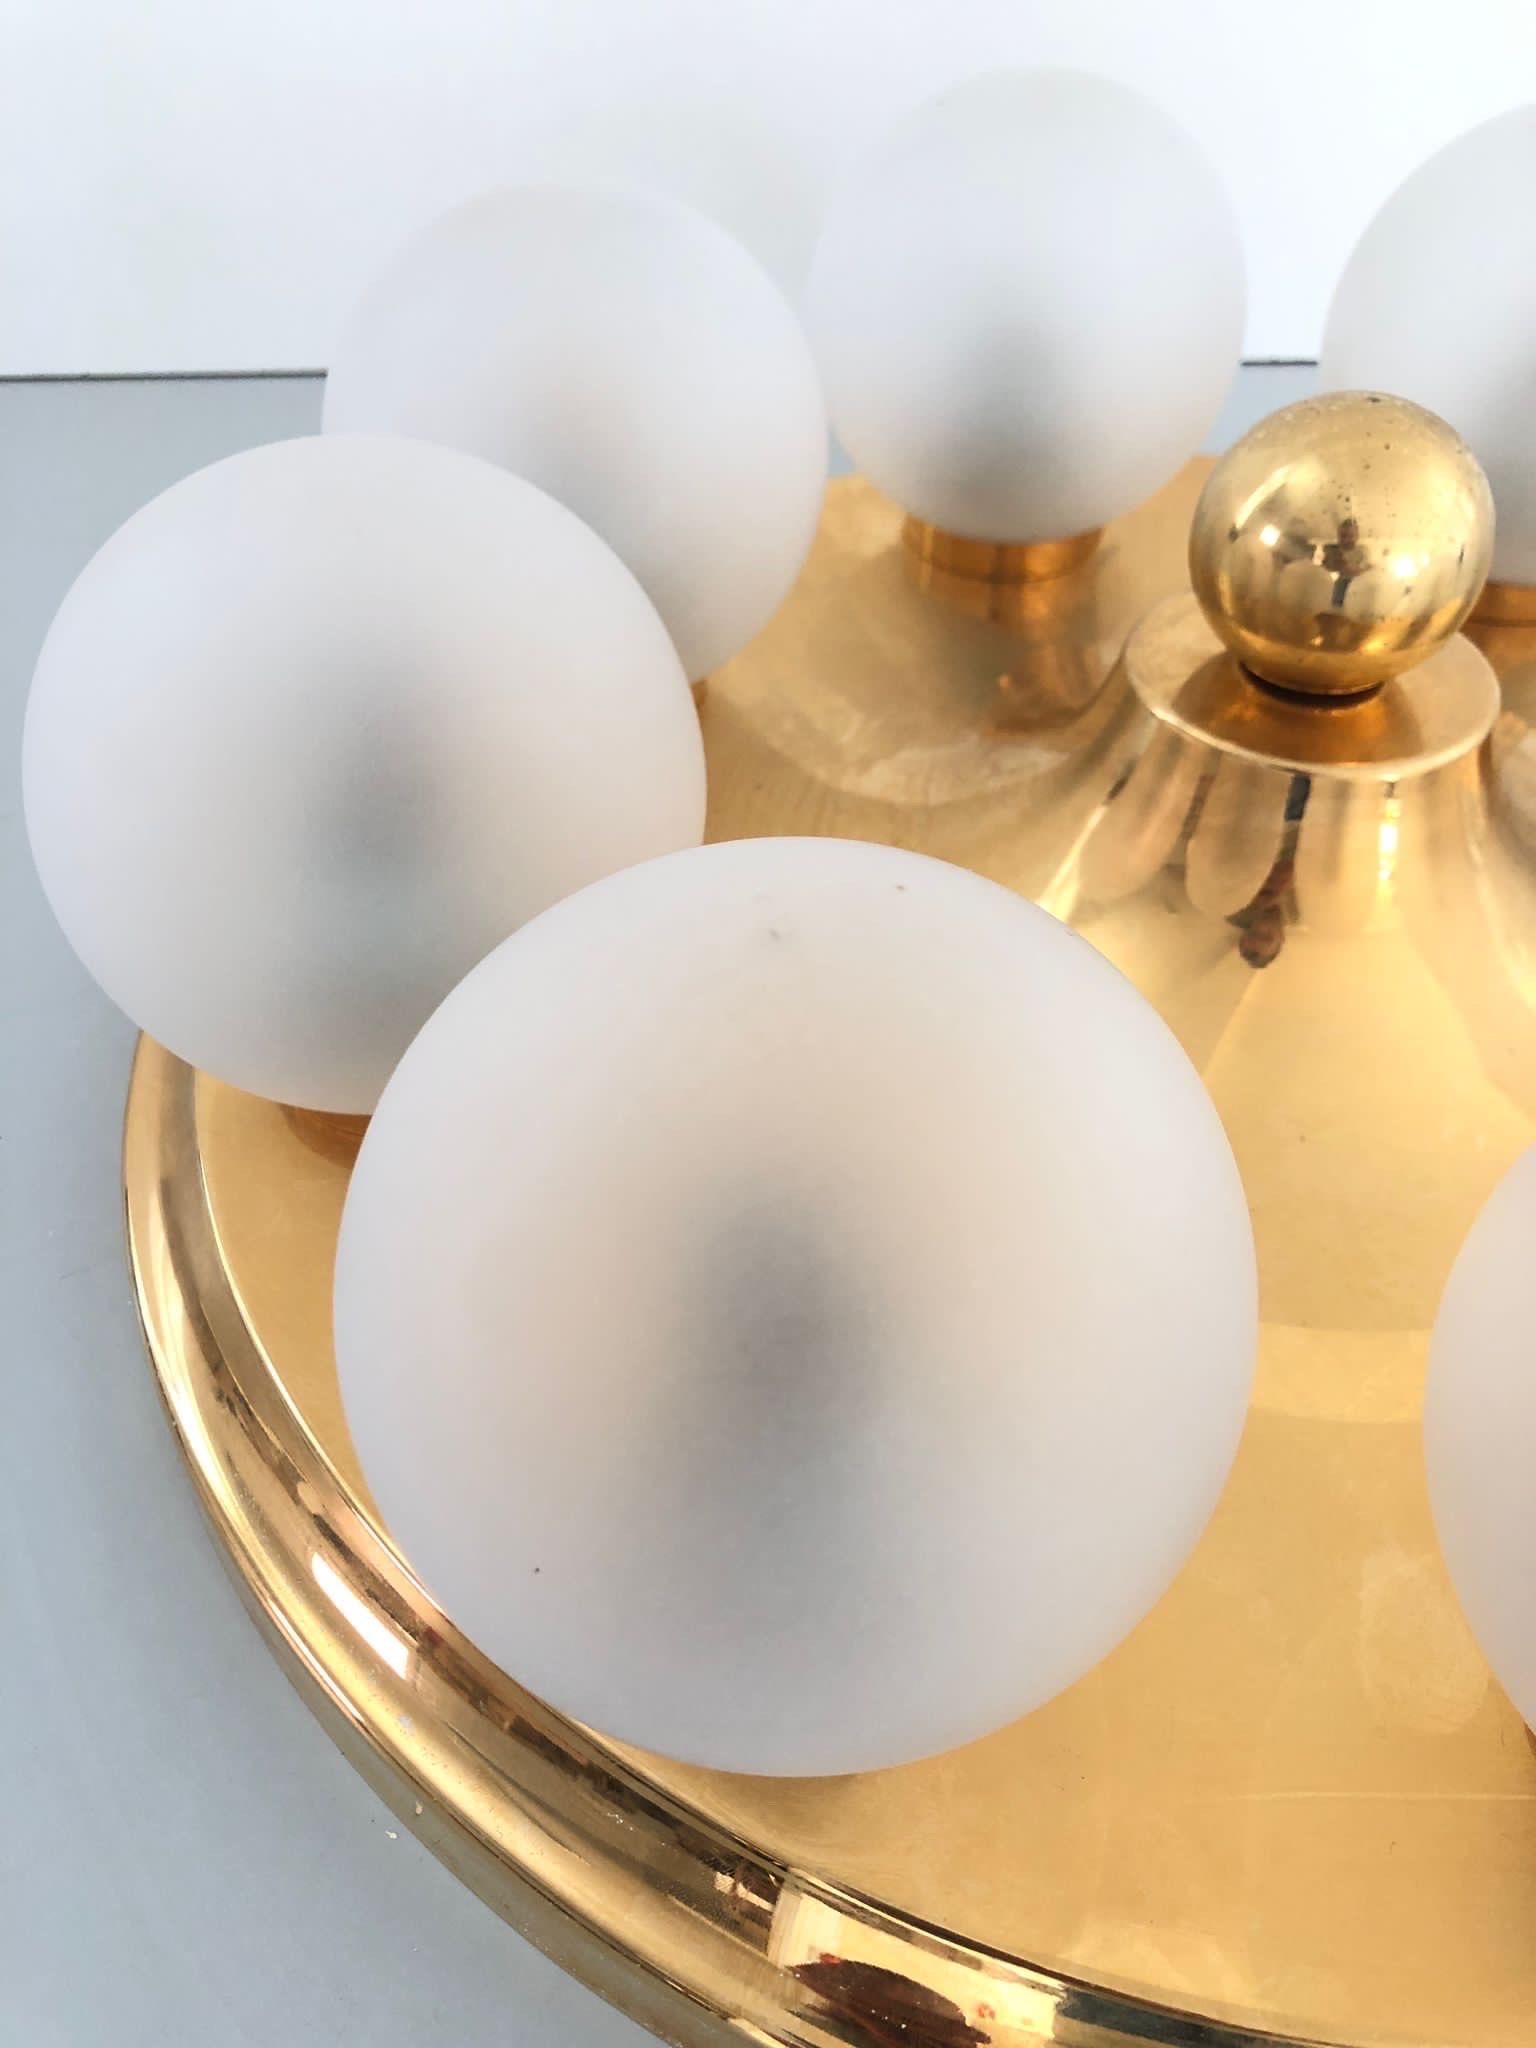 Atomic Age Gold Metal and 8 Ball Flush Mount Light by Kinkeldey, 1970s, Germany For Sale 1